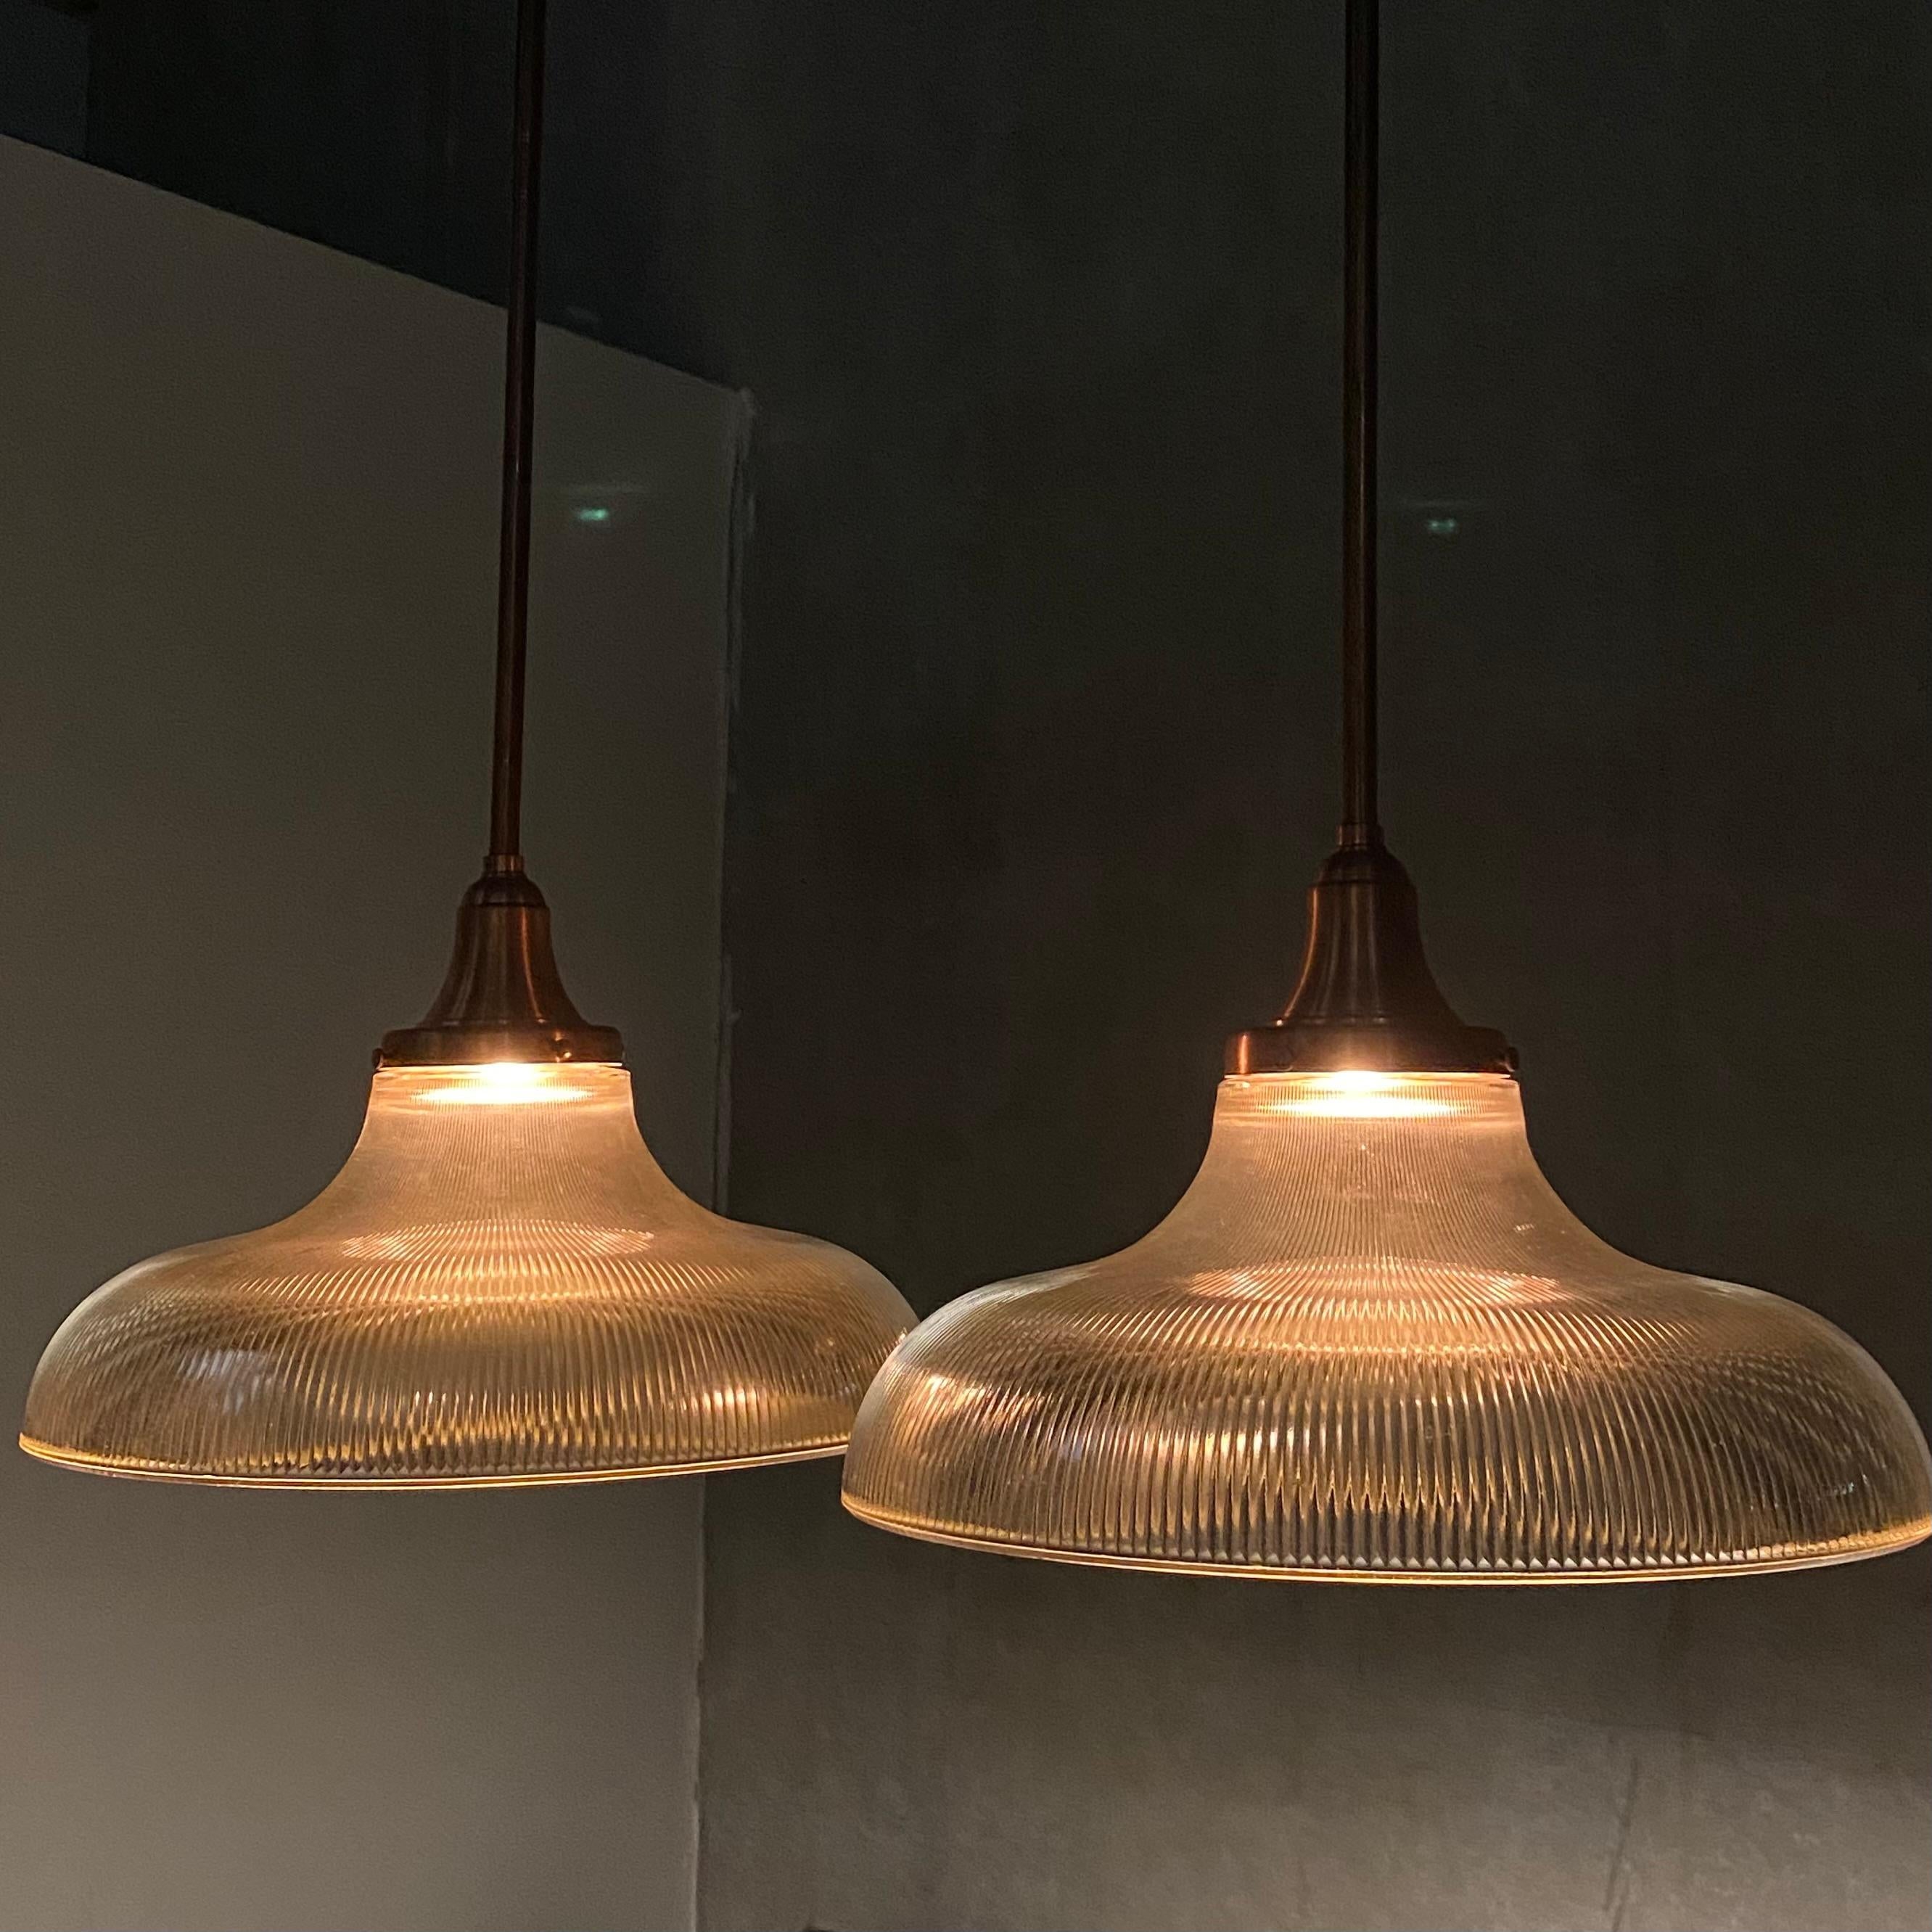 A very nice pair of Copper stem large holophane pendant lights with easy mounting plate, rewired and csa approved.

Nice oversized unique size.